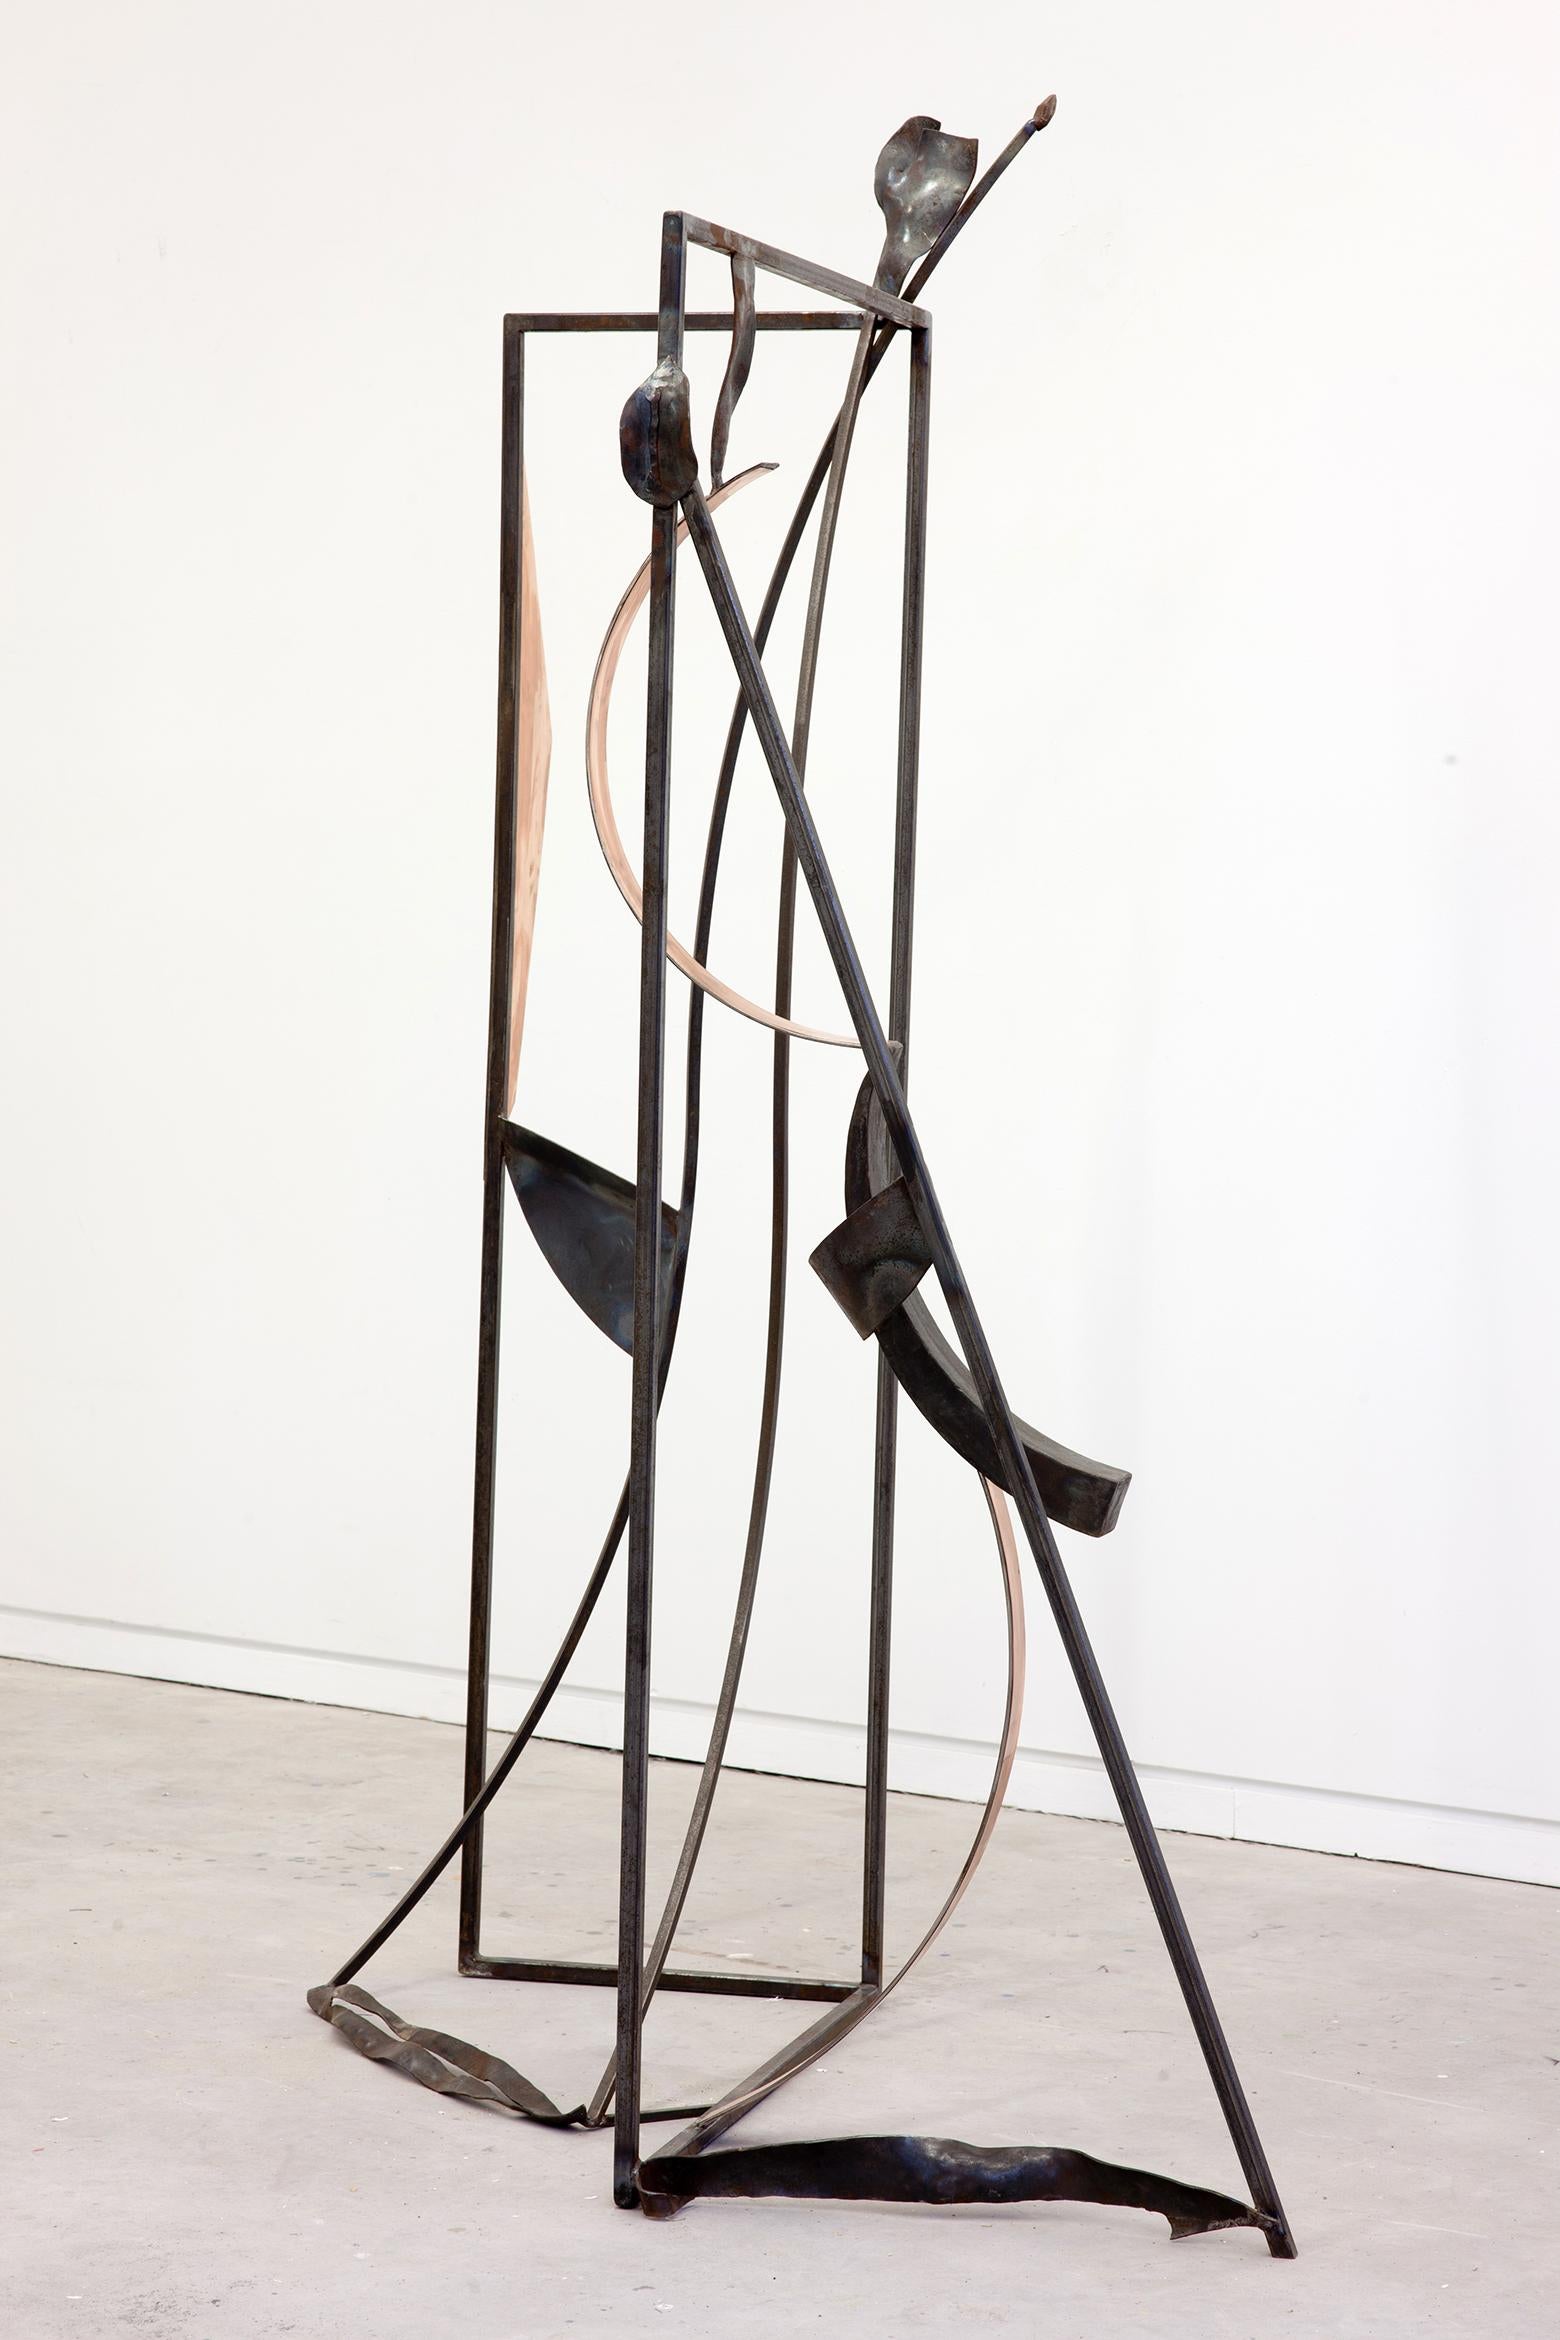 In the 1960’s, Canadian Otto Rogers was one of the first artists to create abstract sculptures out of welded steel and continued to do so during his long career. The elegant curves and the striking shape of this piece in steel and copper suggests